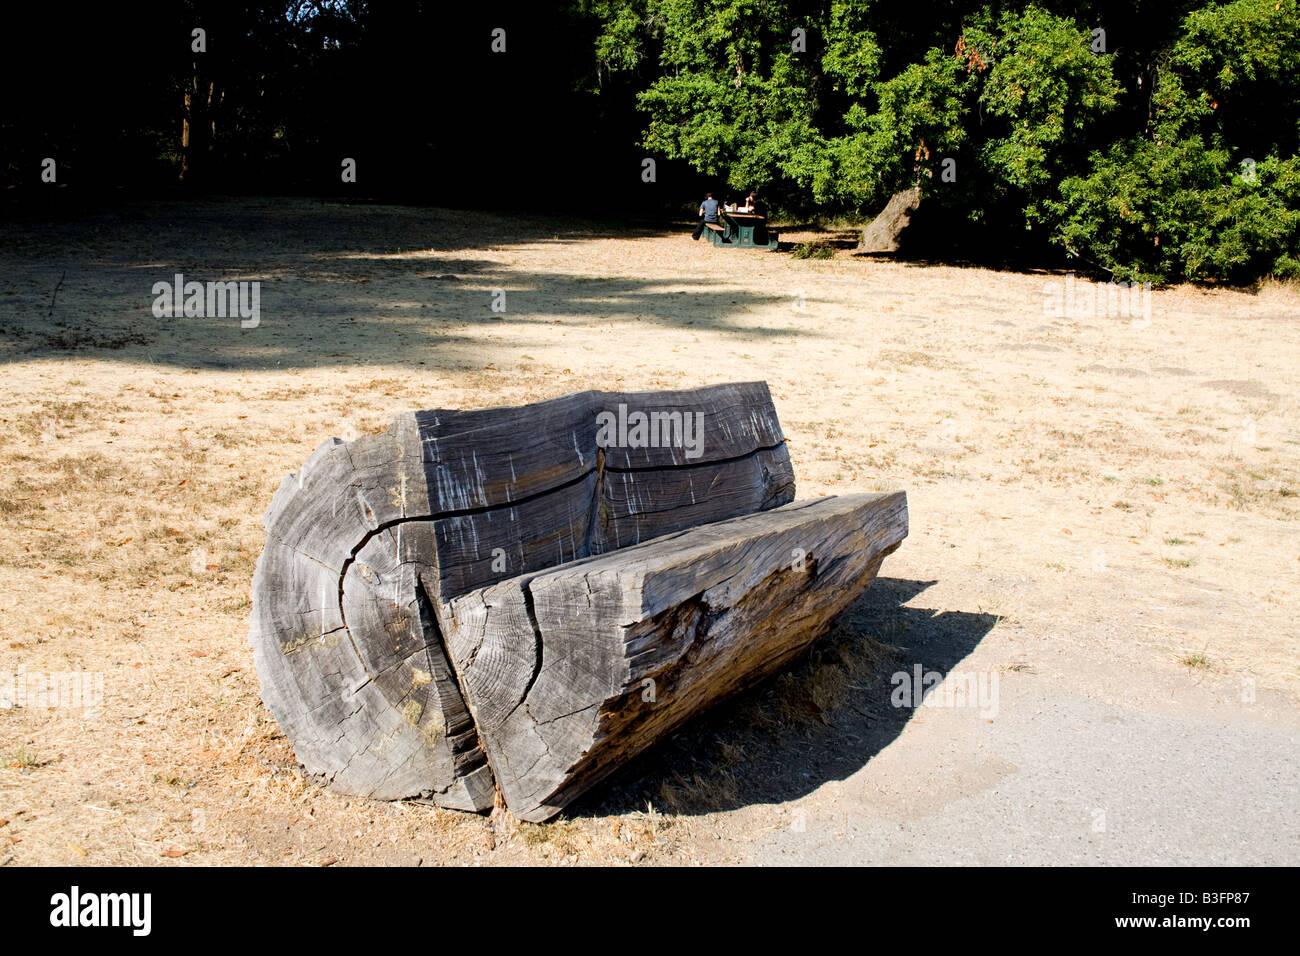 A bench made out of a portion of a tree in Marin County, California Stock Photo